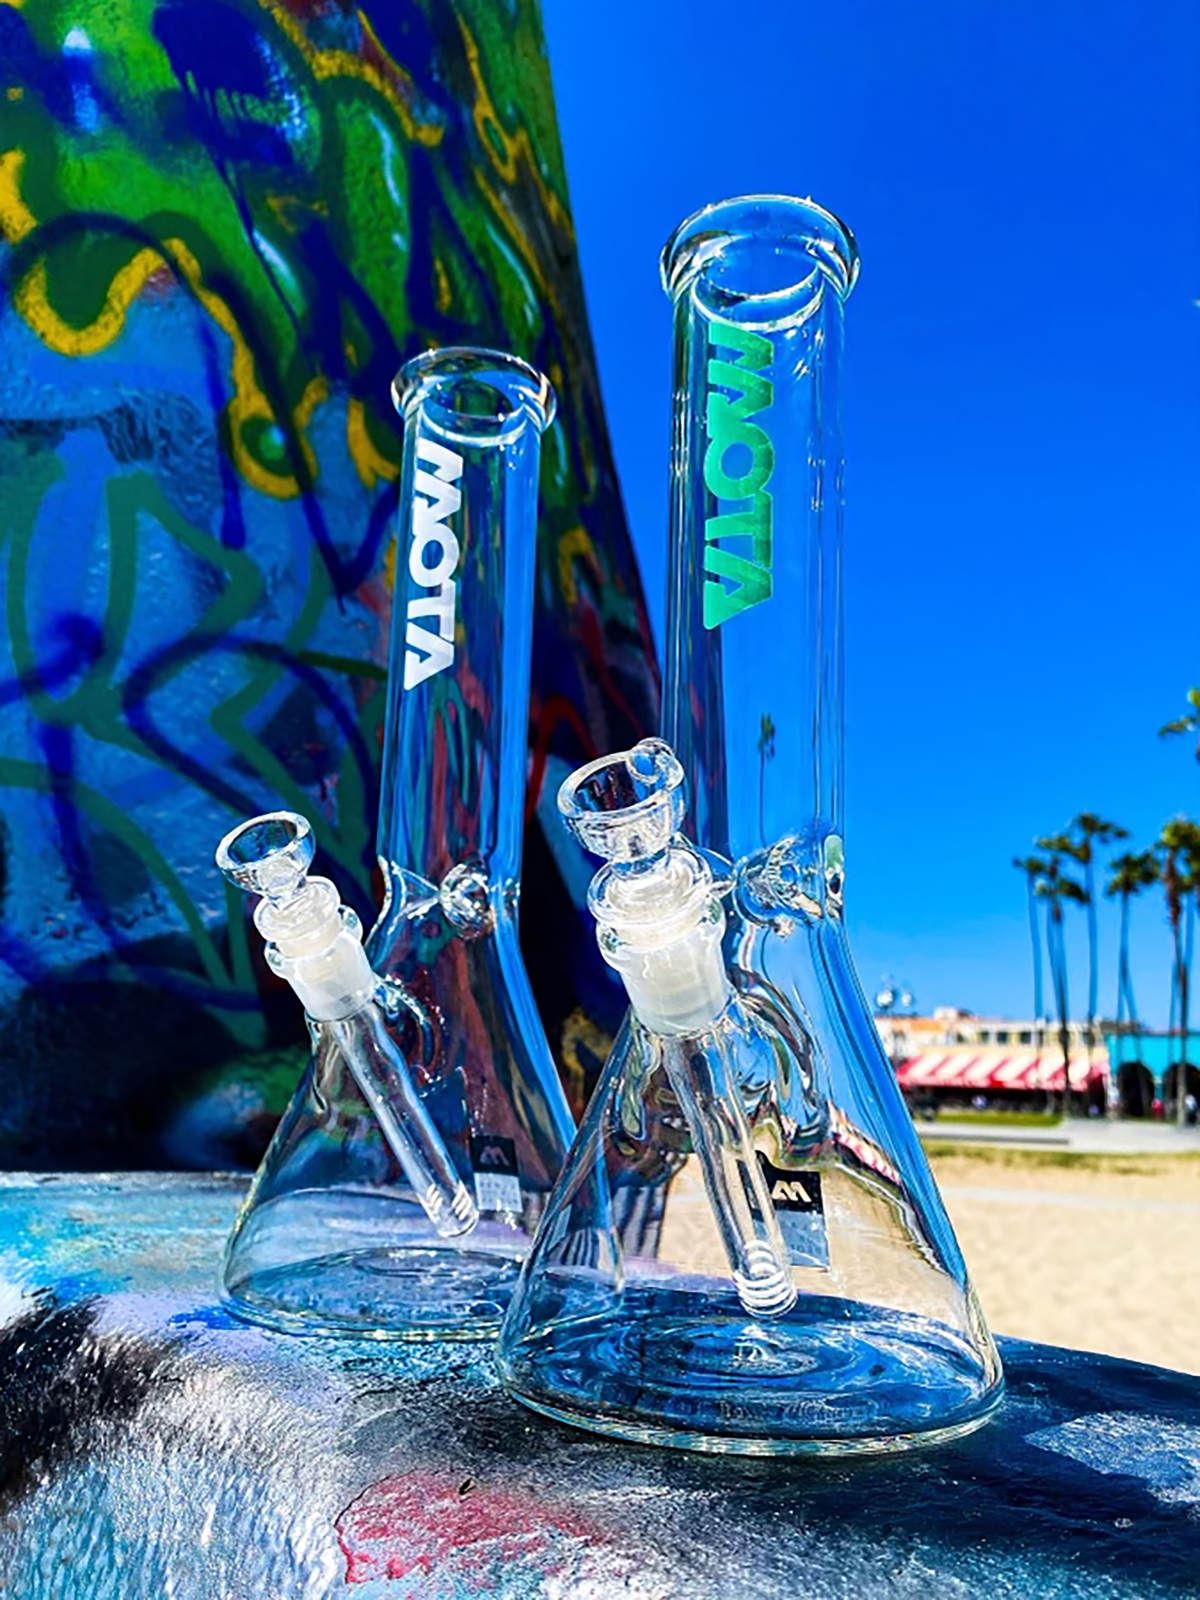 Buy a bong, support a Latino artisan through this stylish L.A.